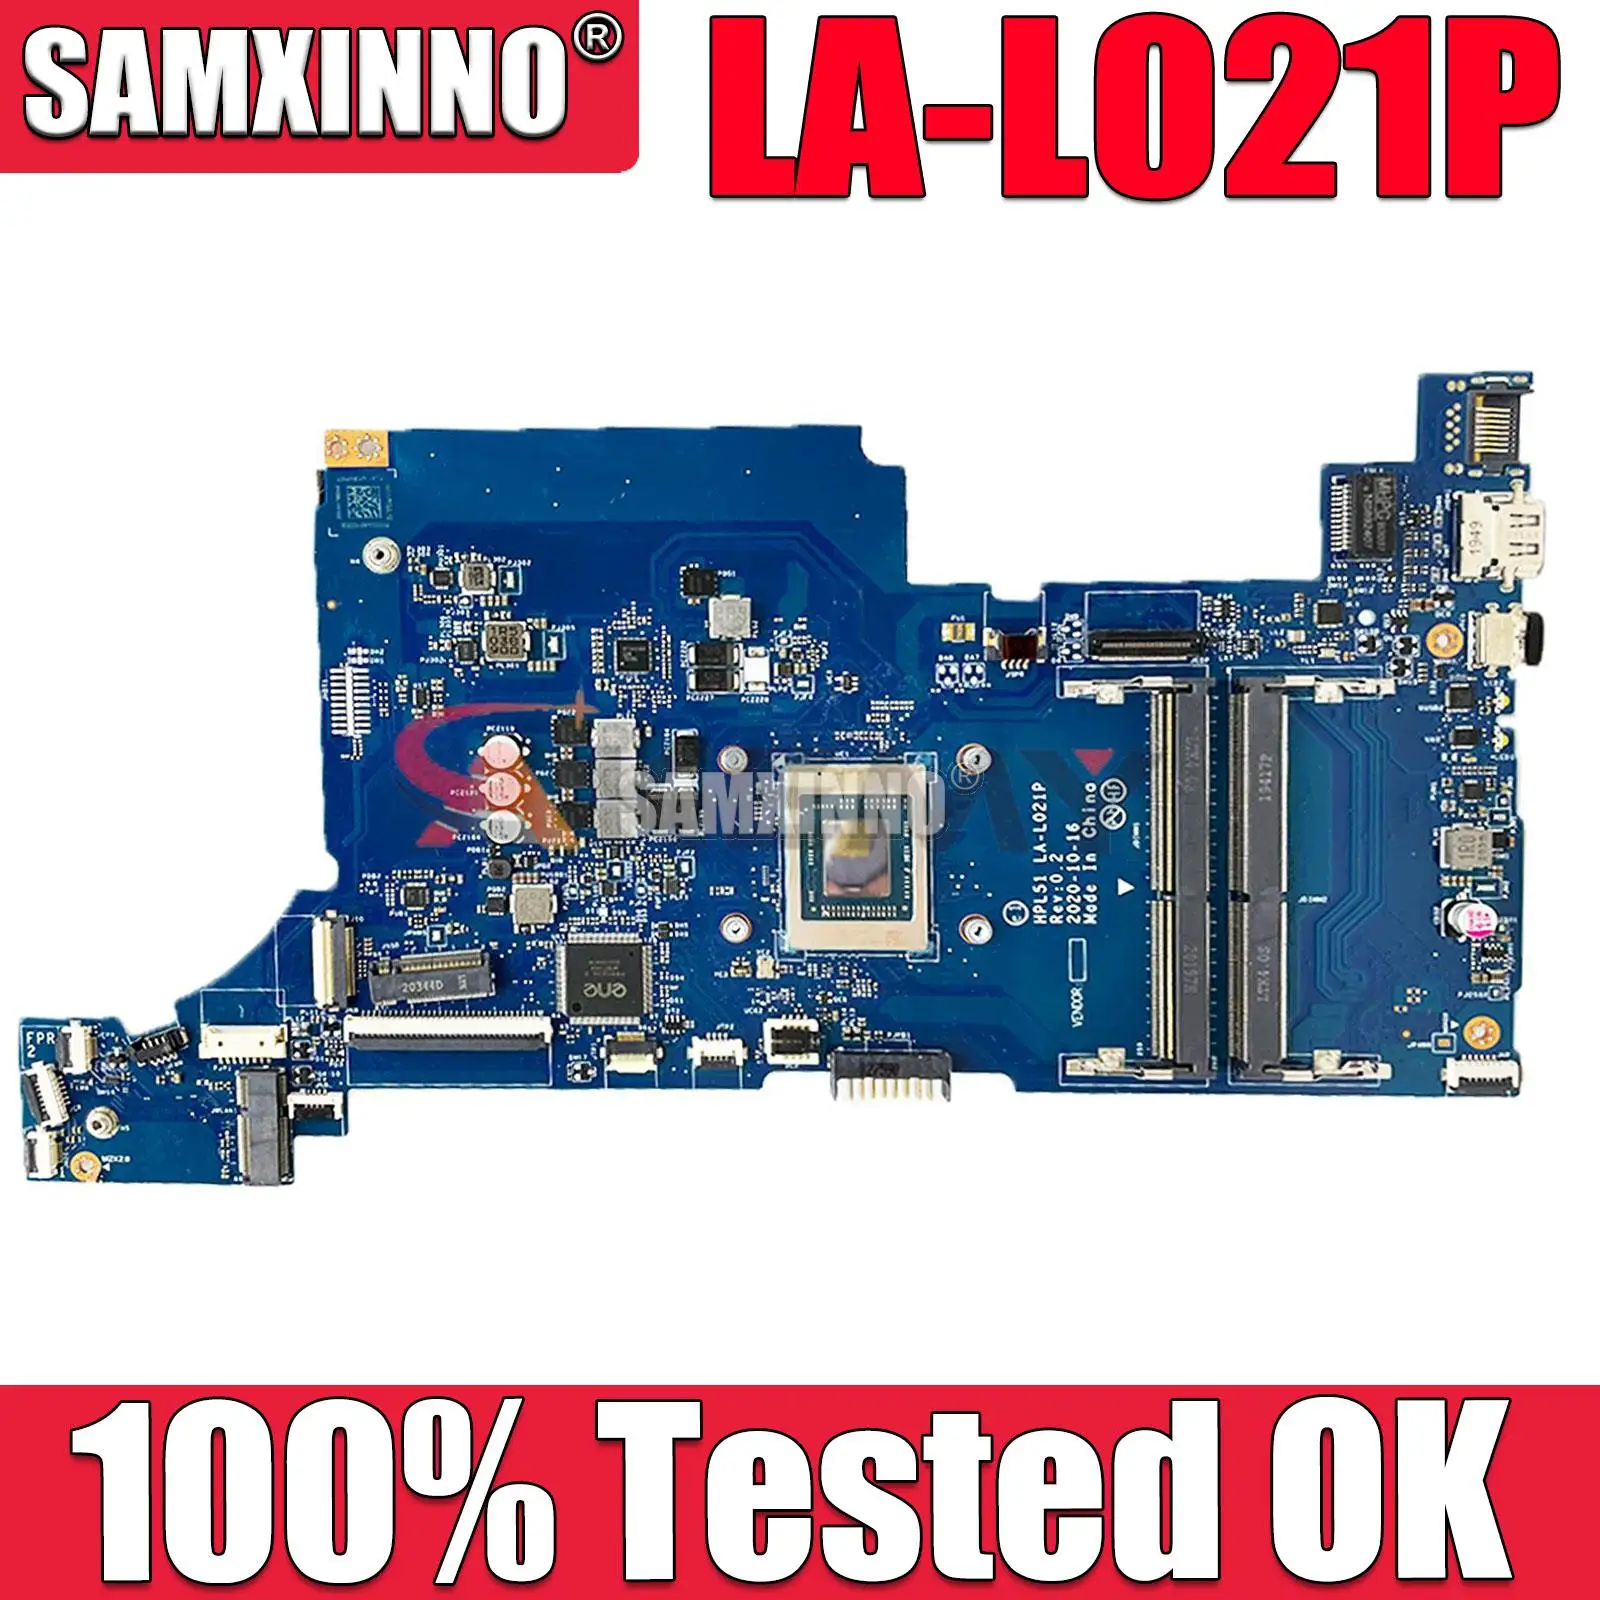 

For HP 255 G8 Laptop Motherboard HPL51 LA-L021P Mainboard with R5 R7 AMD CPU M49514-601 M49514-001 100% Working